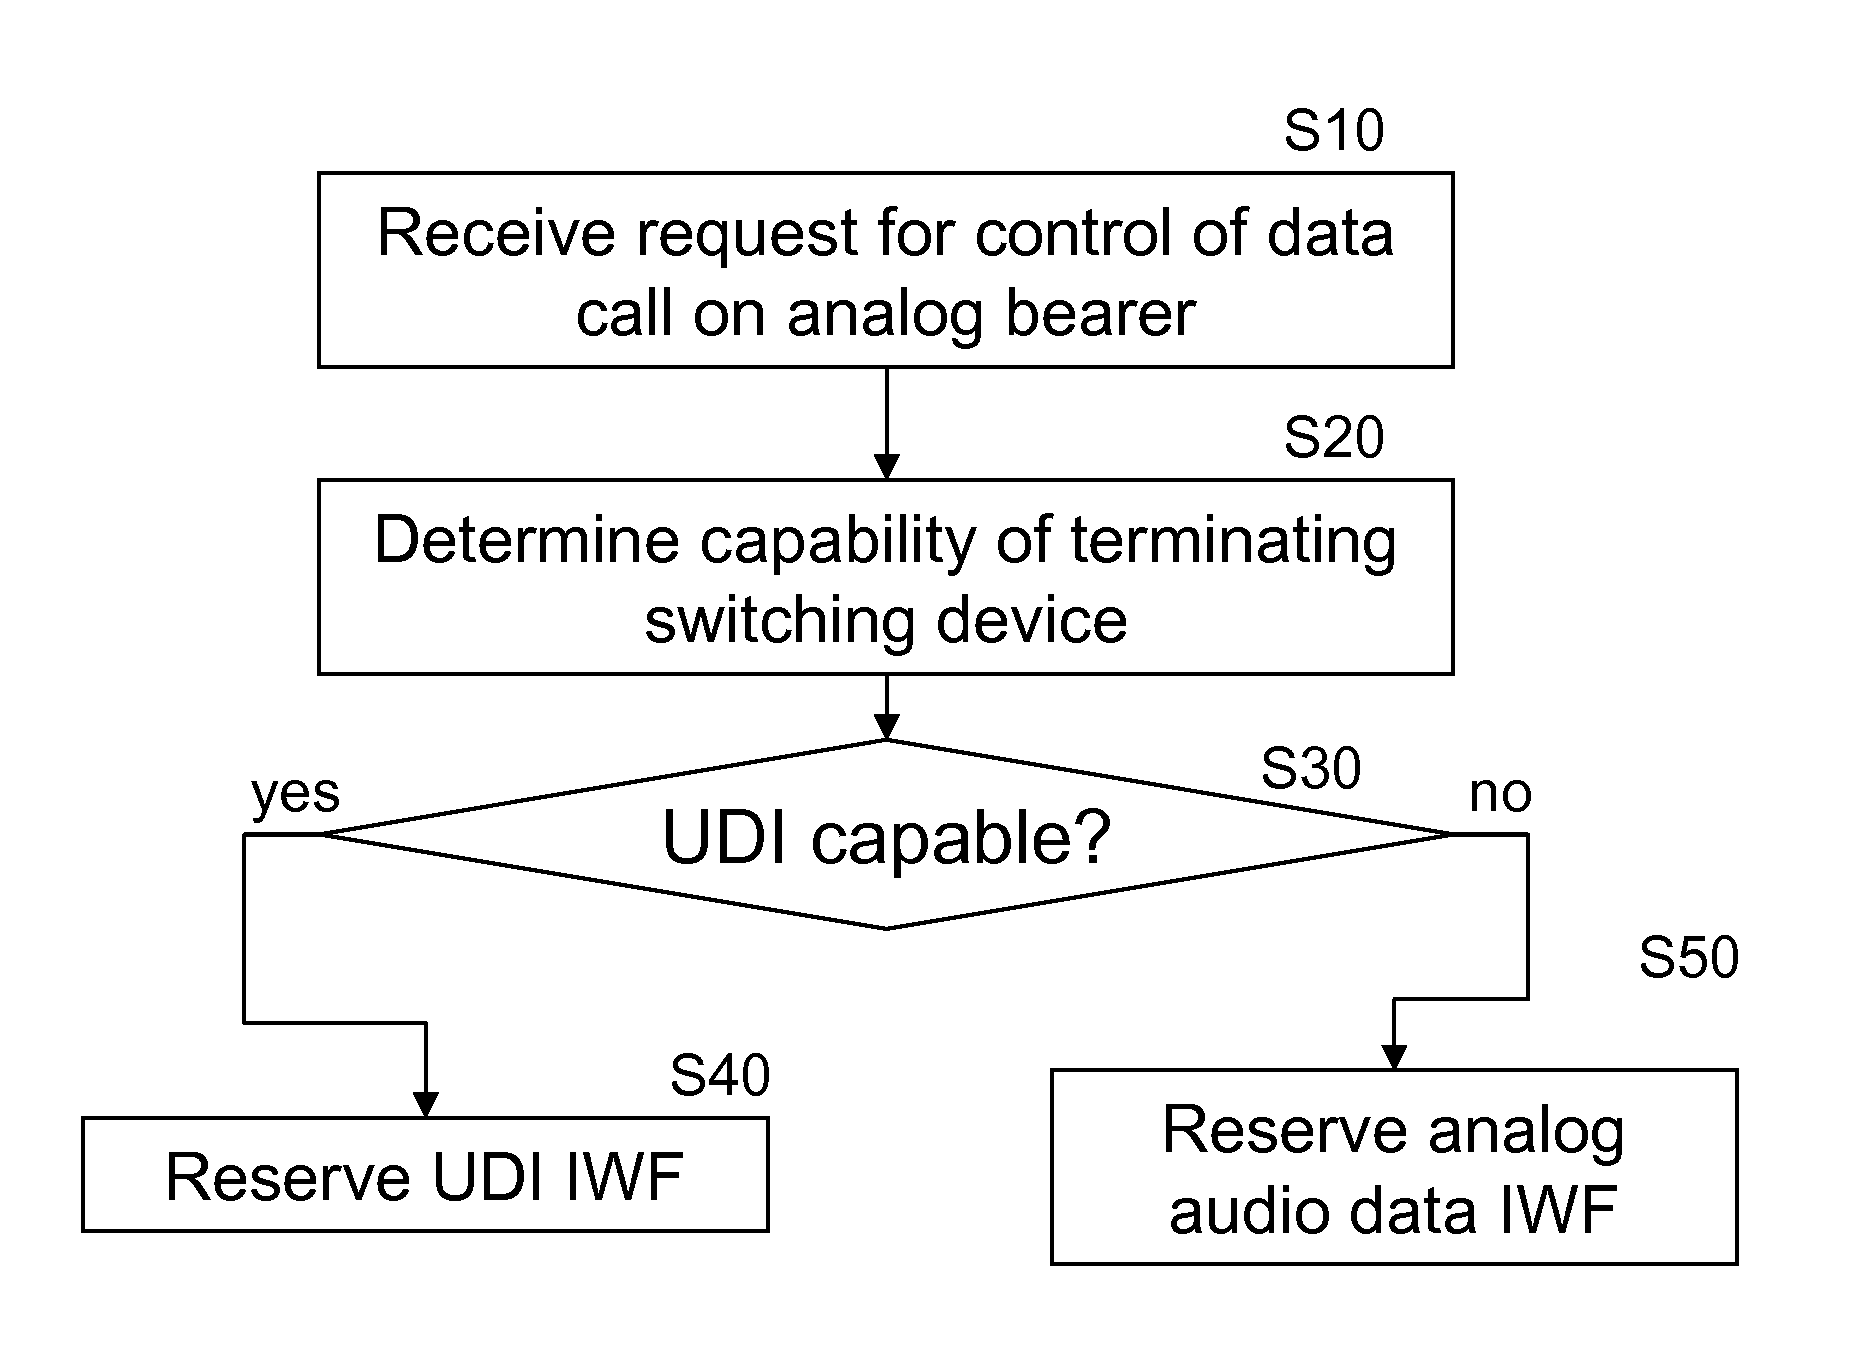 Reducing latency in circuit switched data calls